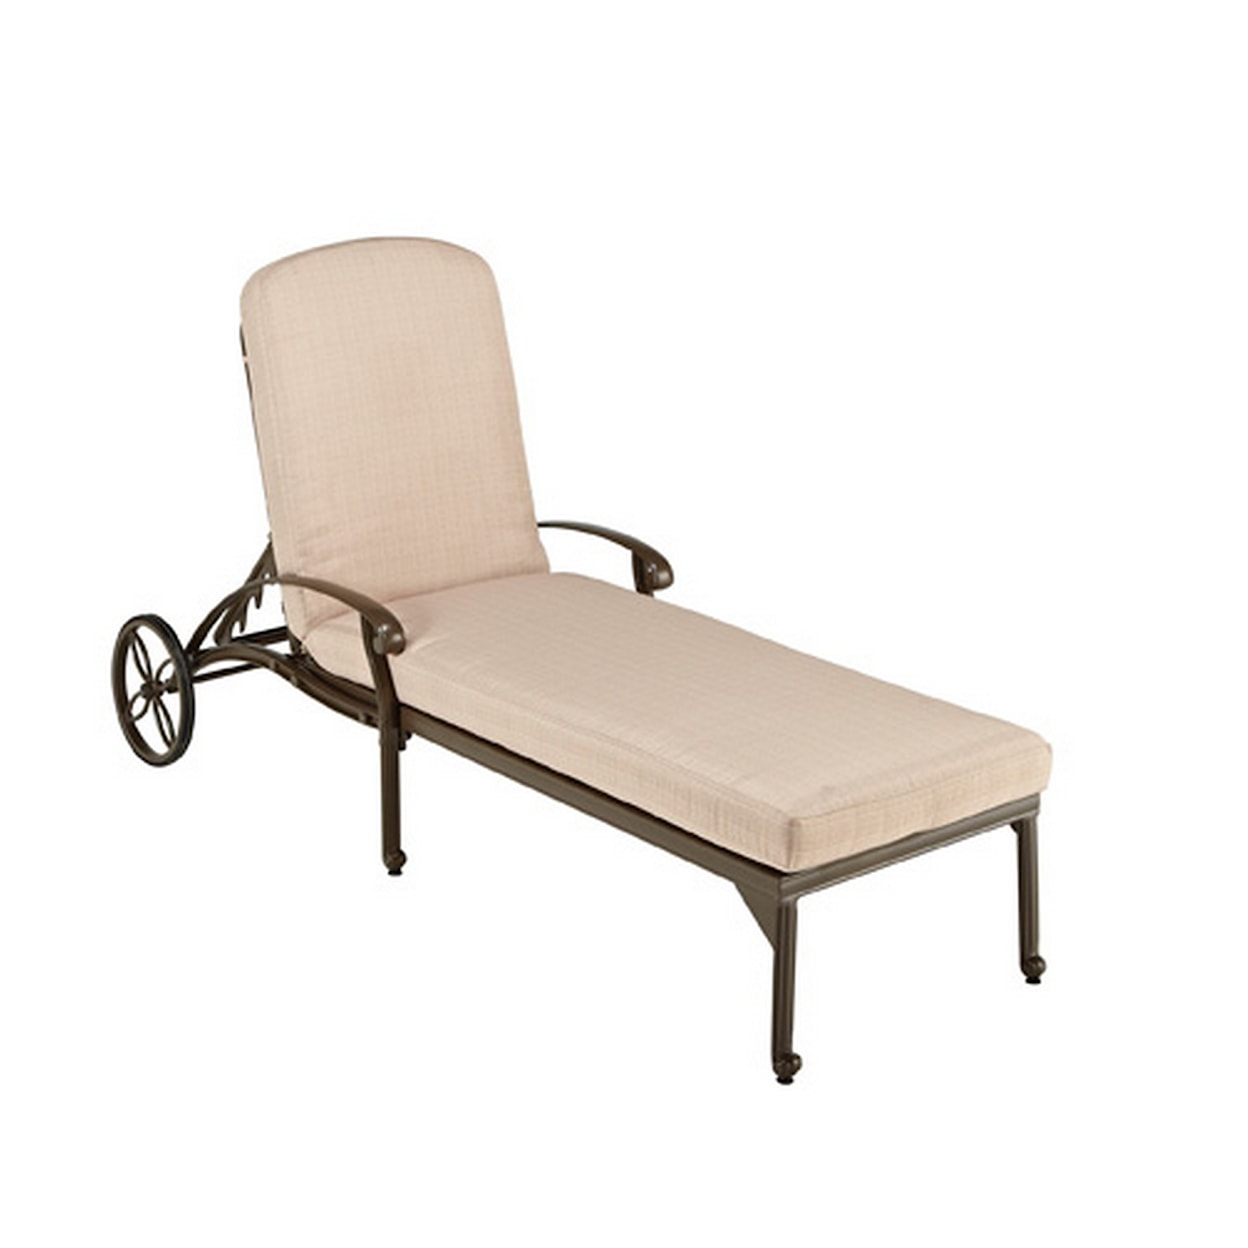 homestyles Capri Outdoor Chaise Lounge